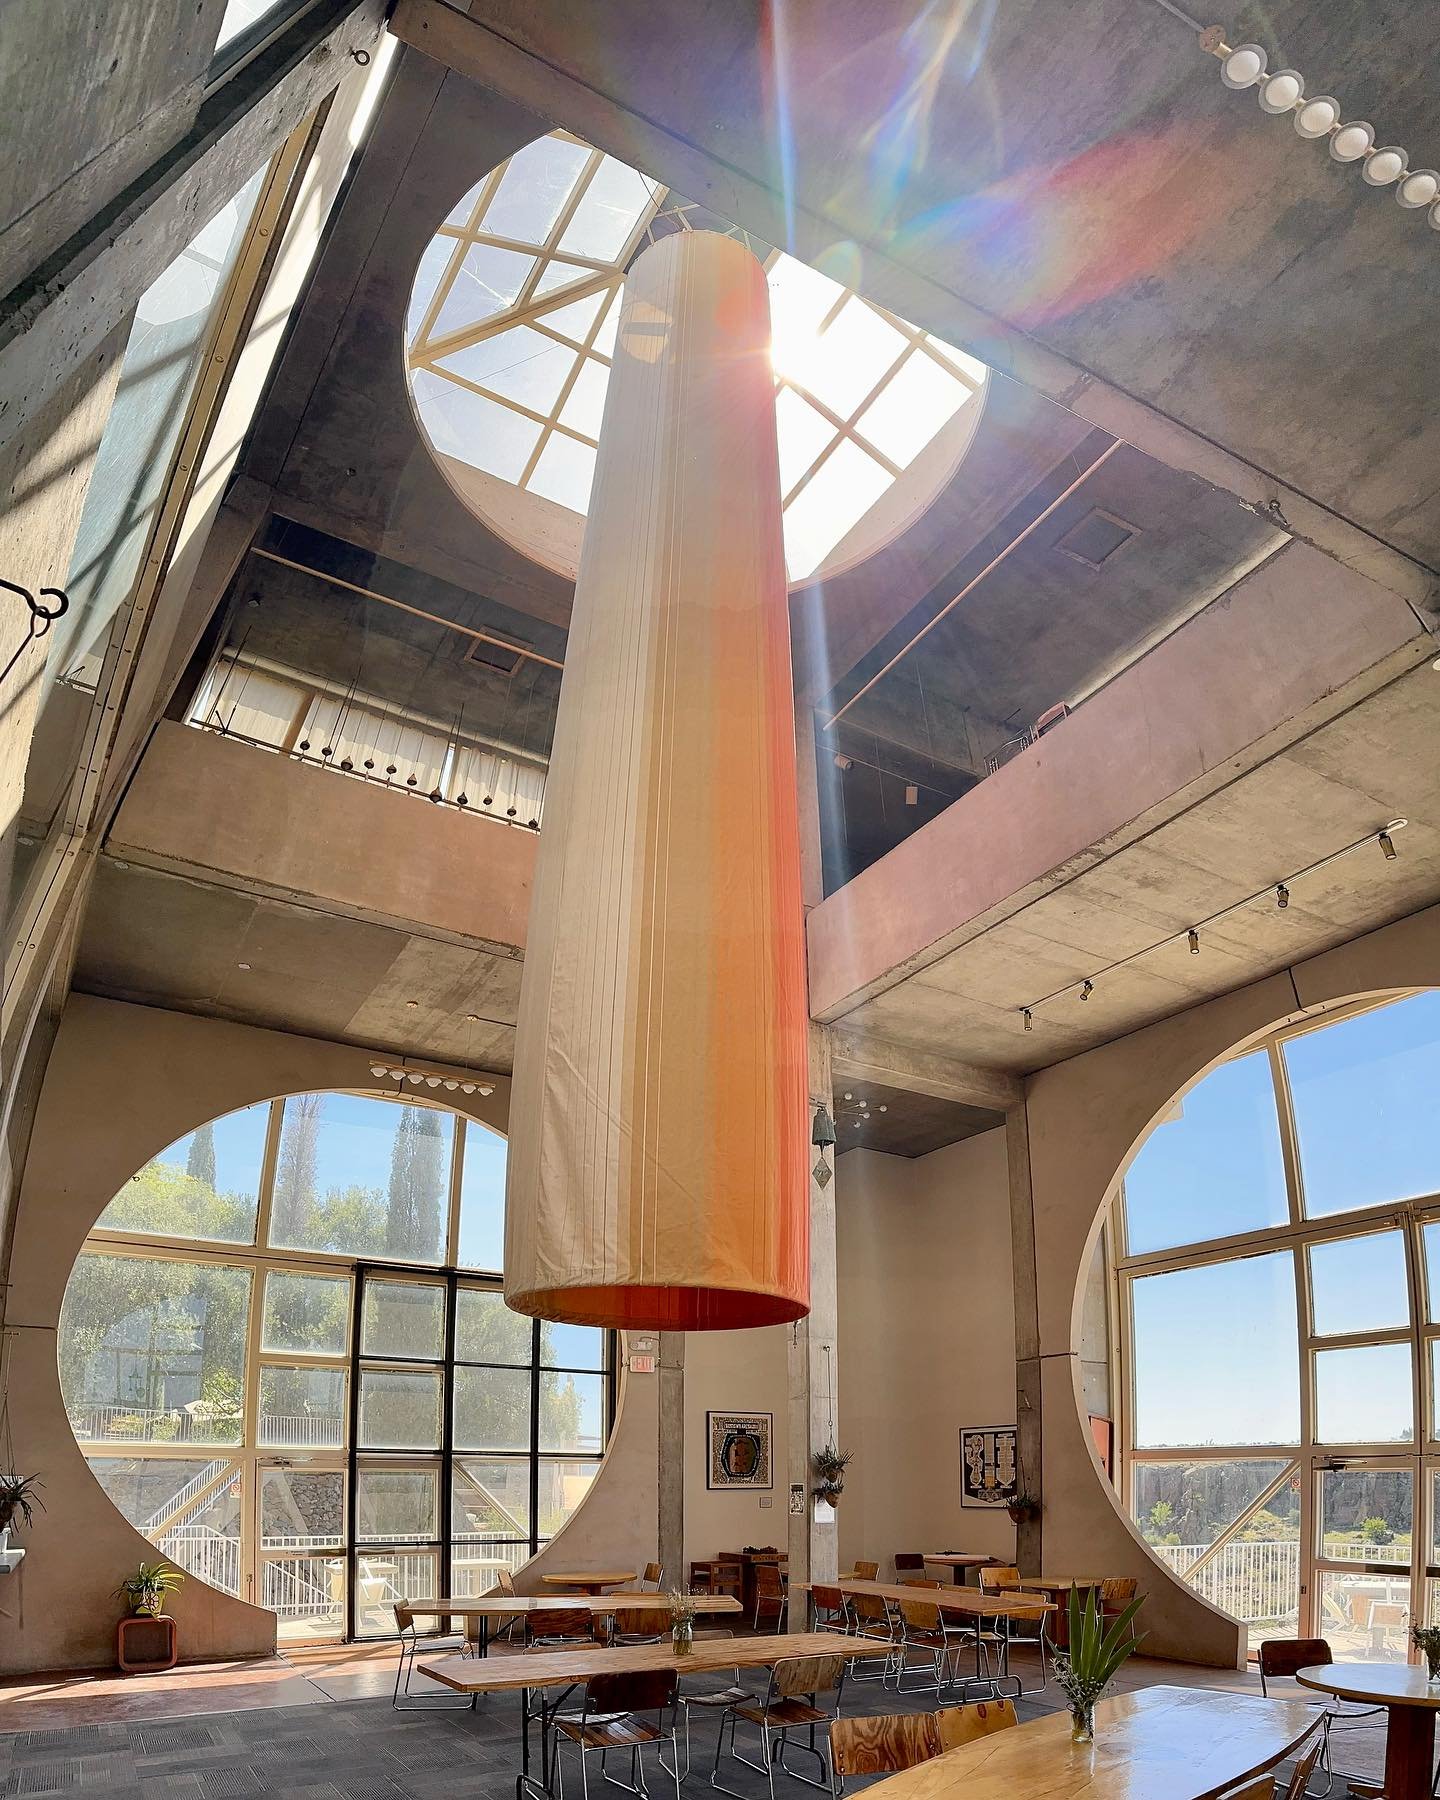 Been gone a little, but for a great reason. For adventures and discoveries. 🙌

This is Arcosanti. It&rsquo;s an ongoing architectural experiment located in Arizona. The project was started in the 70&rsquo;s by Italian-American architect Paolo Soleri